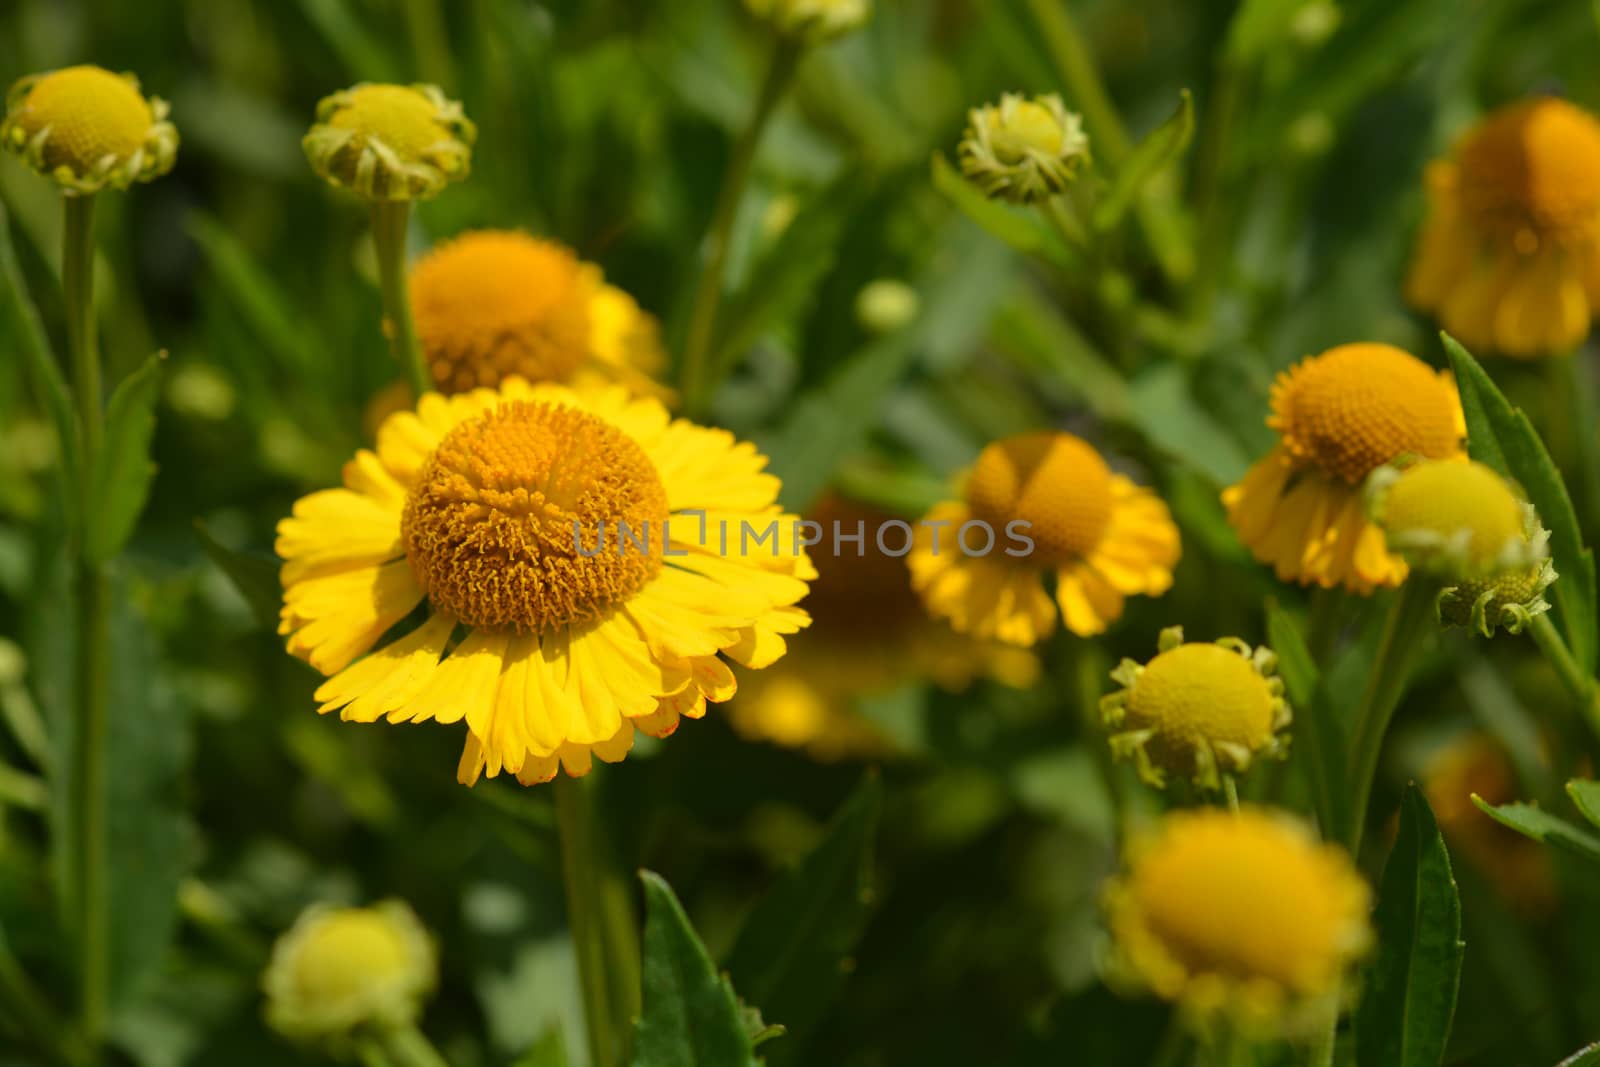 Common sneezeweed by nahhan